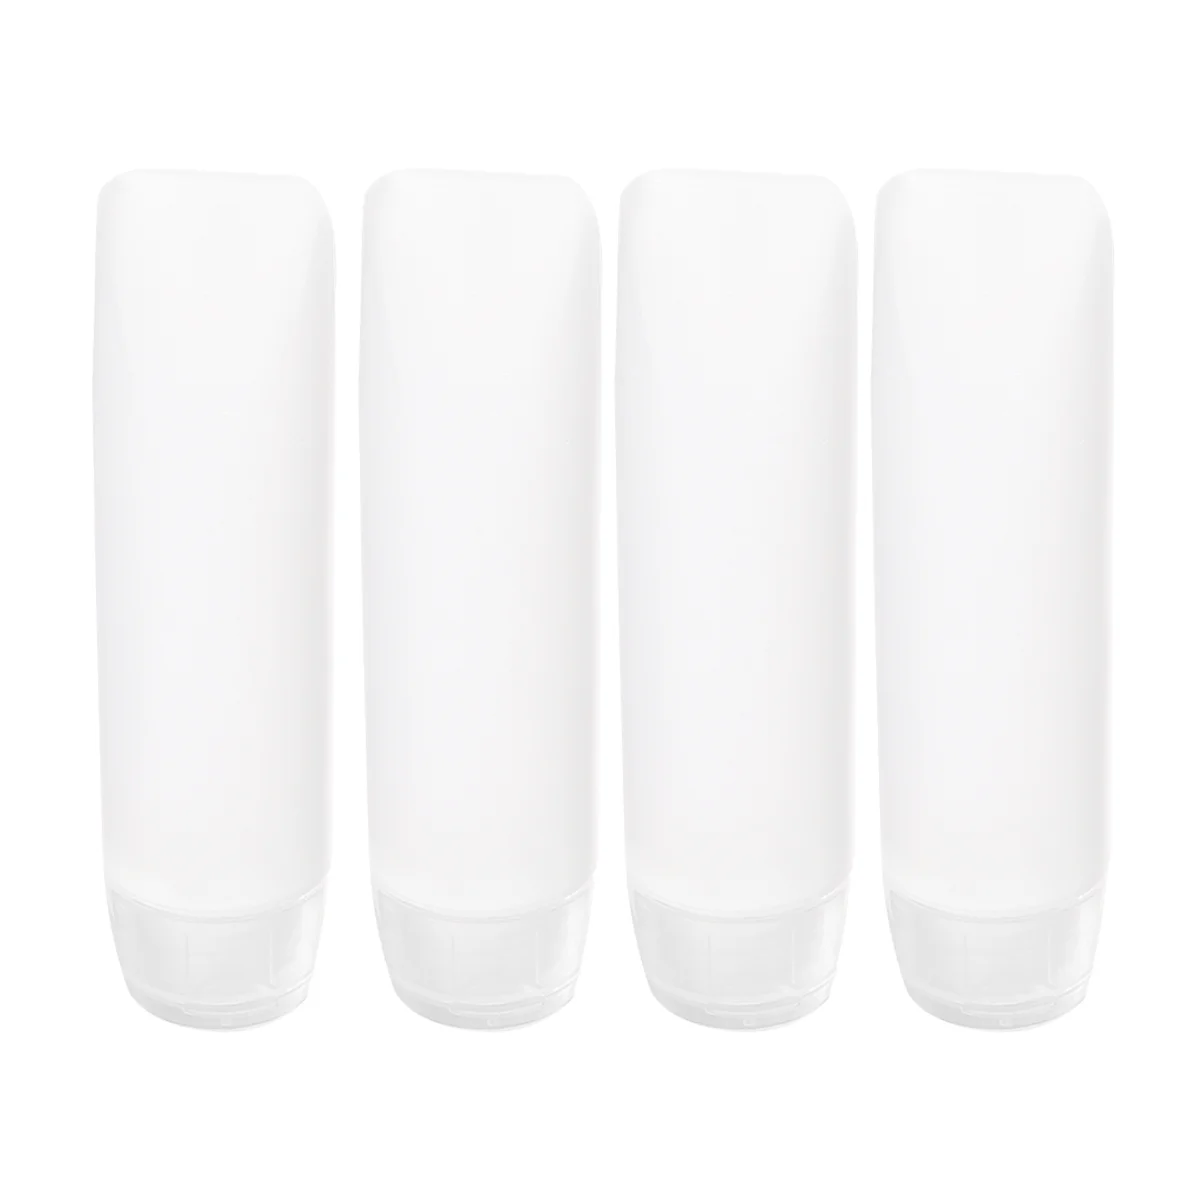 

4PCS Travel Squeeze Tube Makeup Toiletry Refillable Containers For Shampoo Conditioner Lotion Toiletries 30ML Bottle